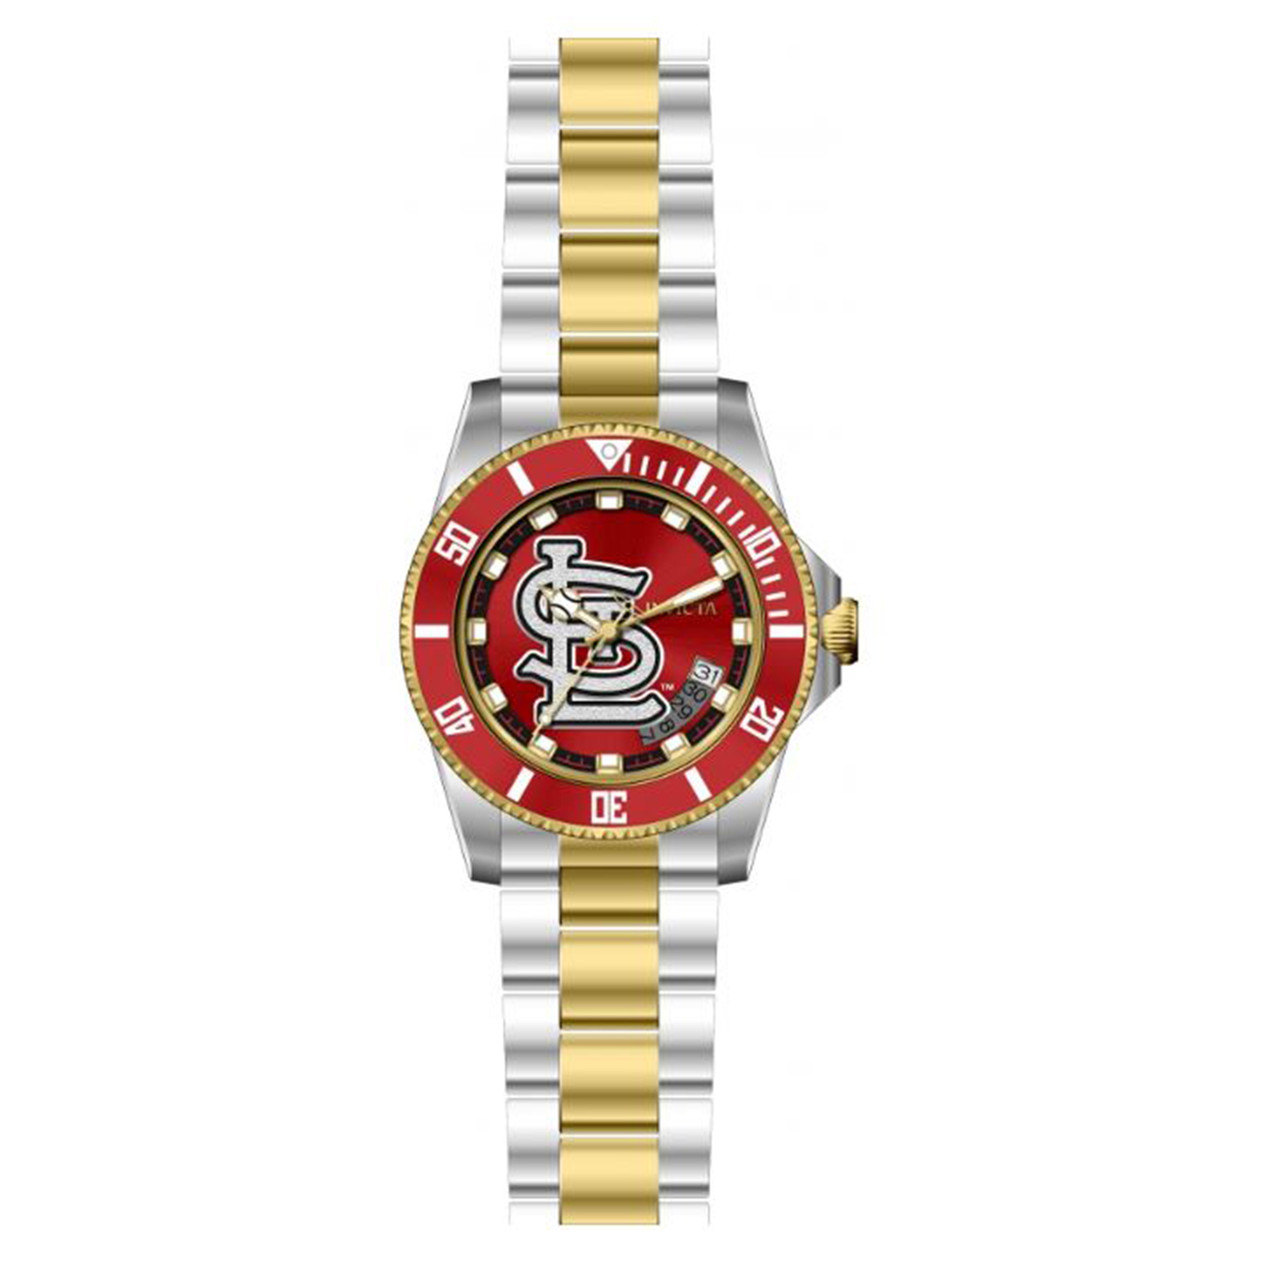 Invicta Men's 42997 MLB Automatic Multifunction Red Dial Watch